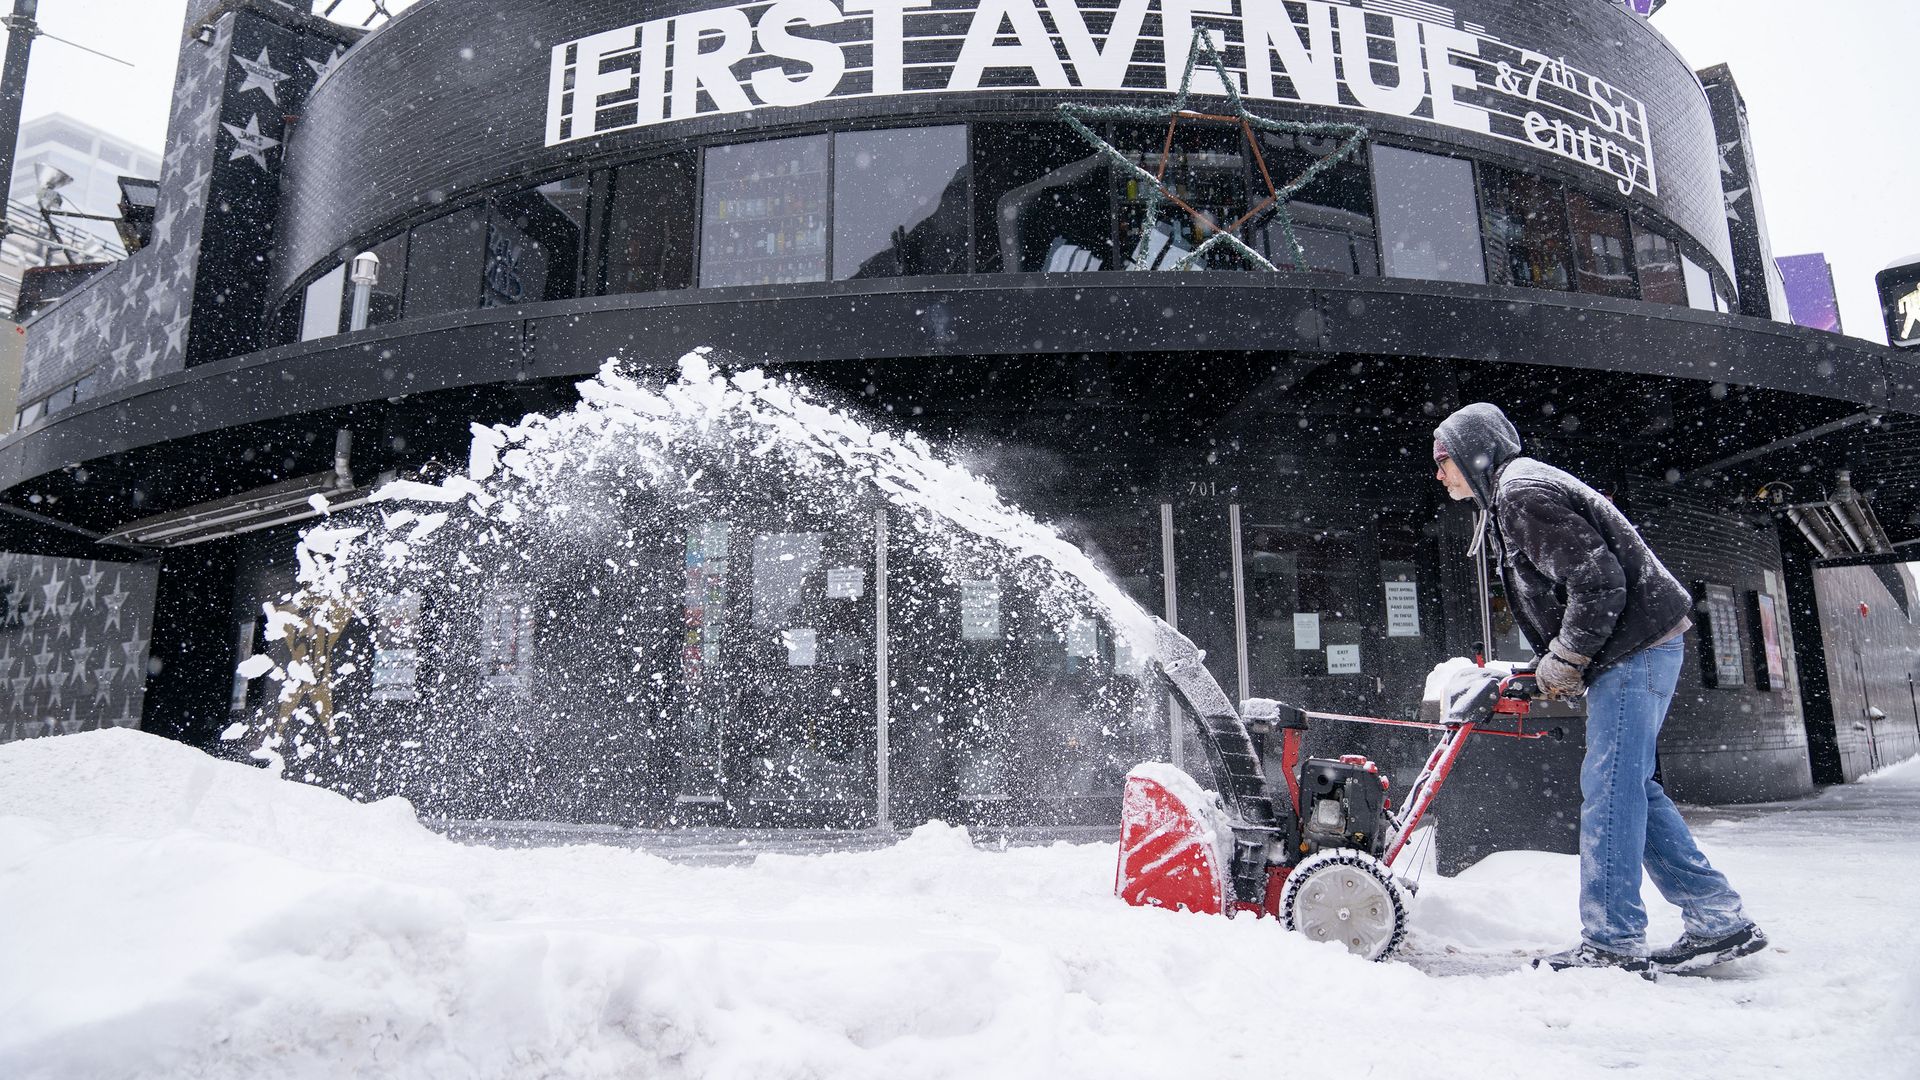 Bryan Erickson clears snow in front of First Avenue nightclub Thursday, Feb. 23, 2023 in downtown Minneapolis, Minn.